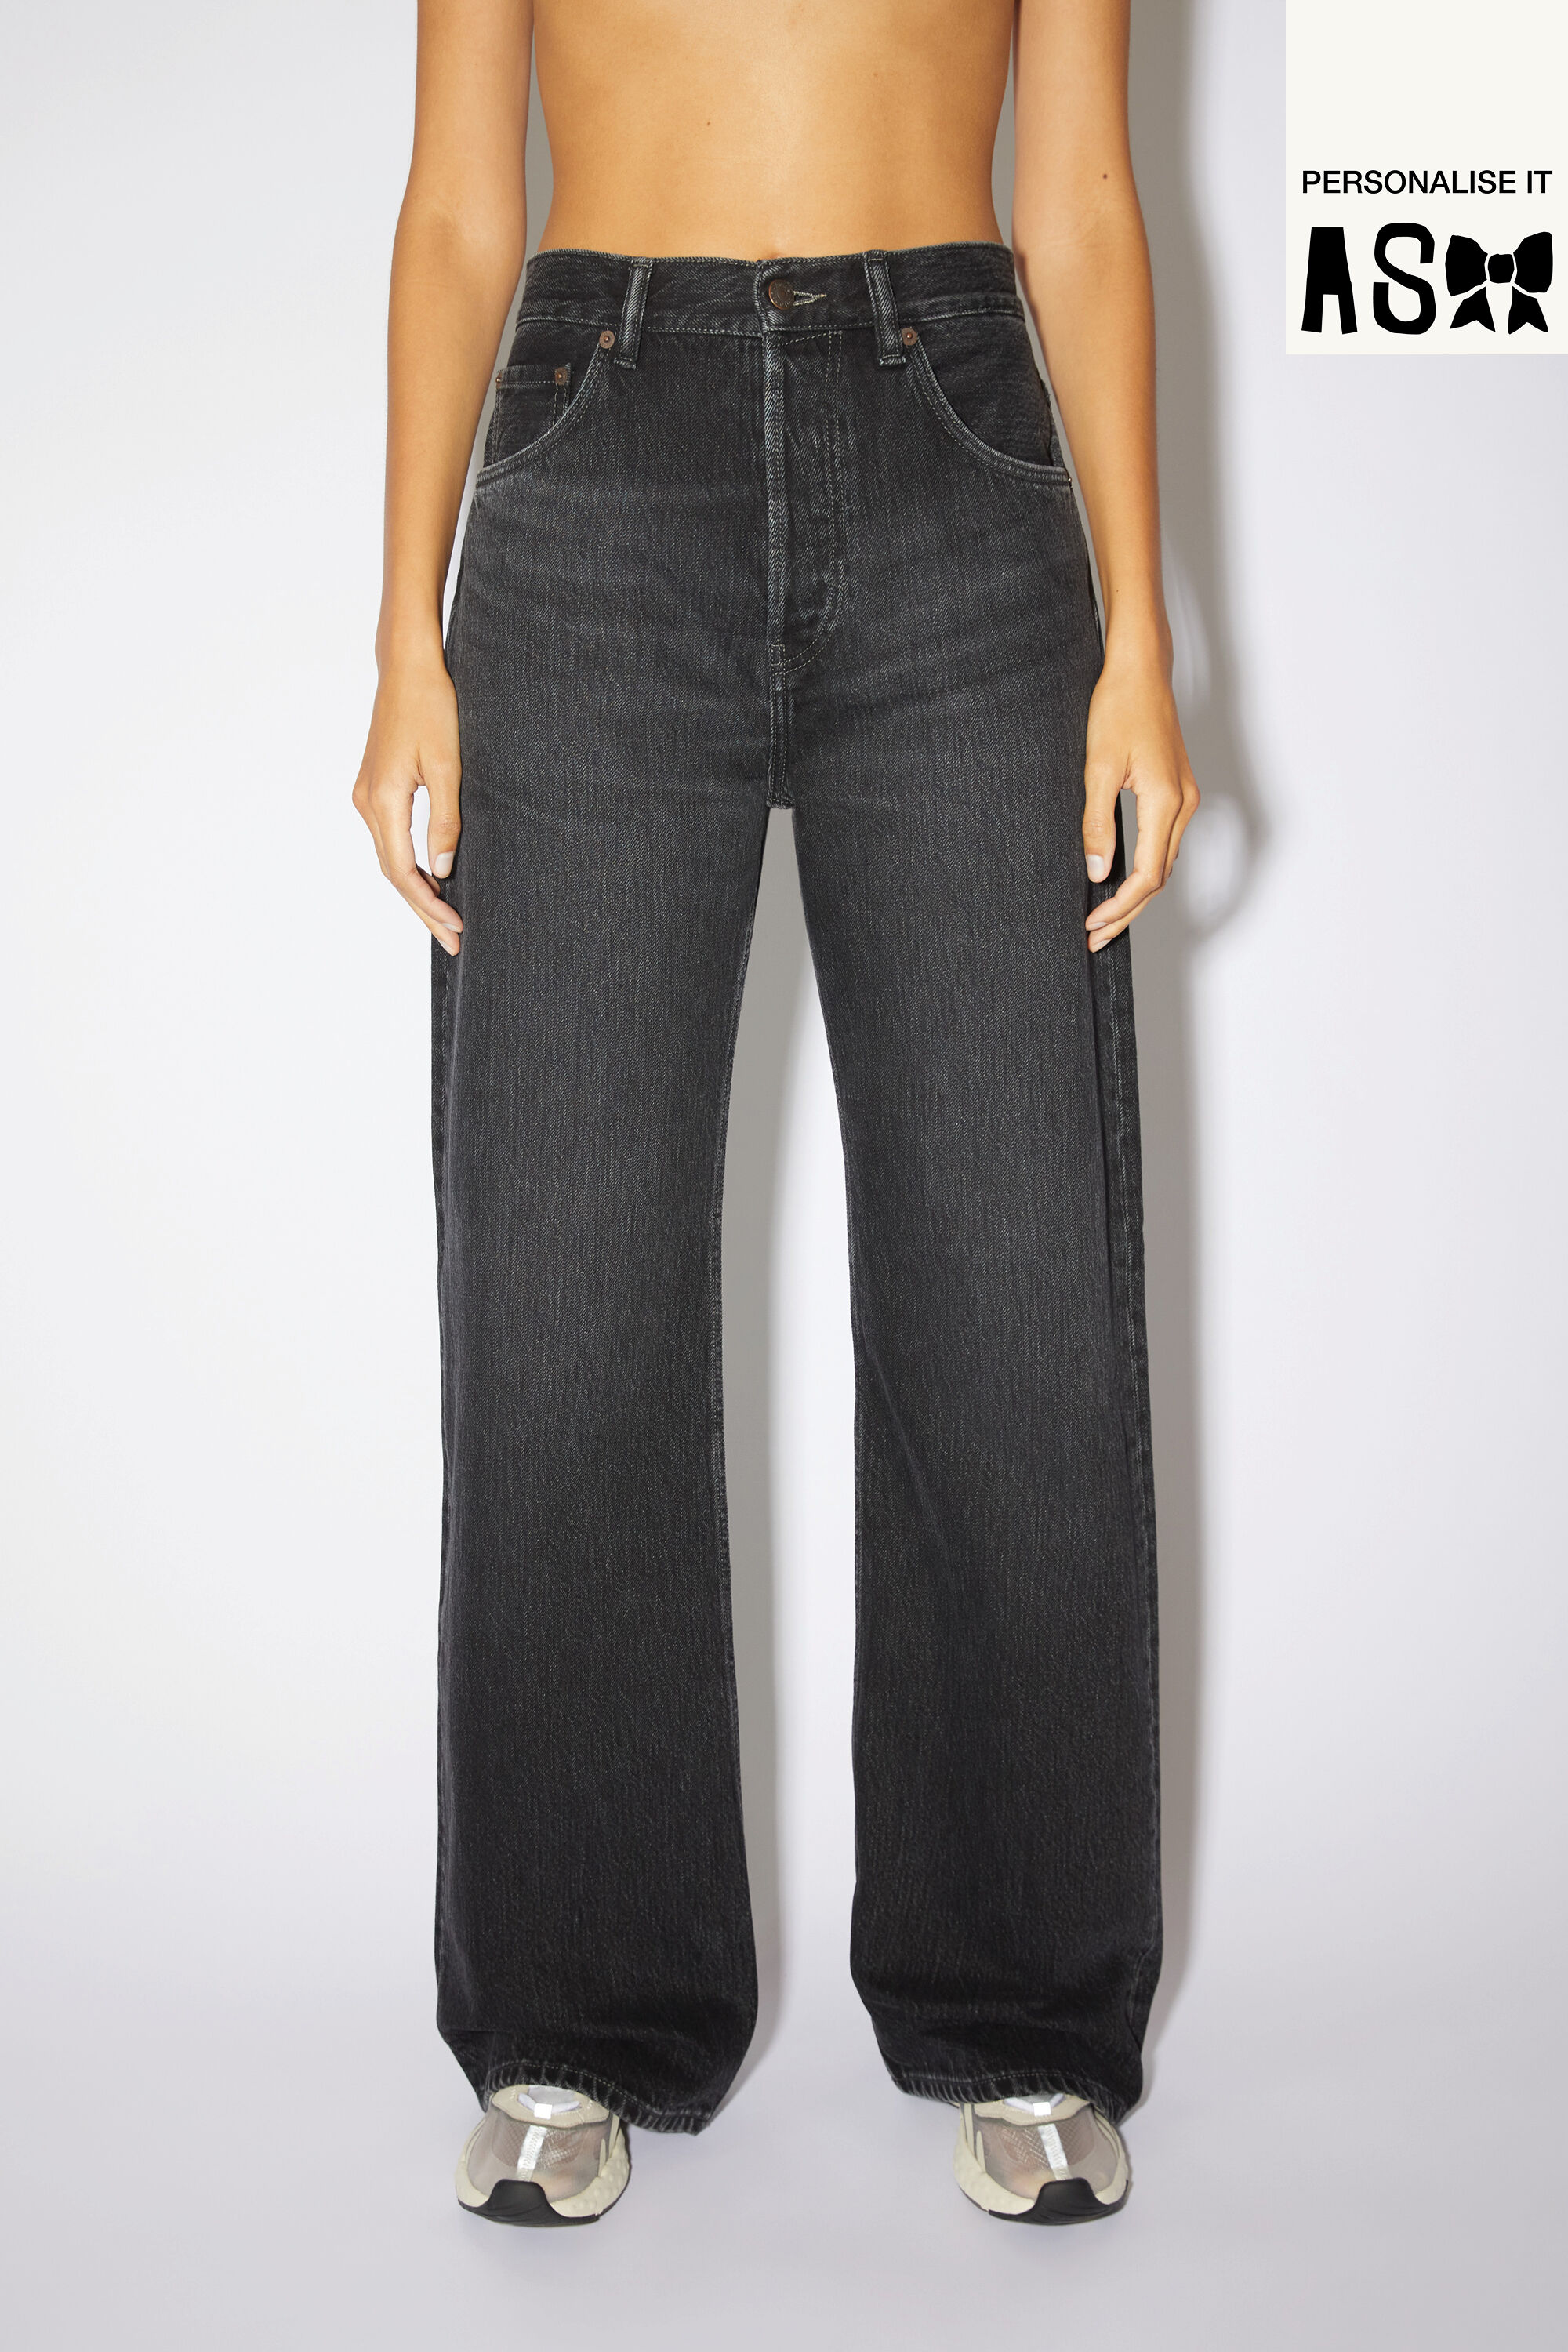 acne studious 1989 loose fit jeans　28×30